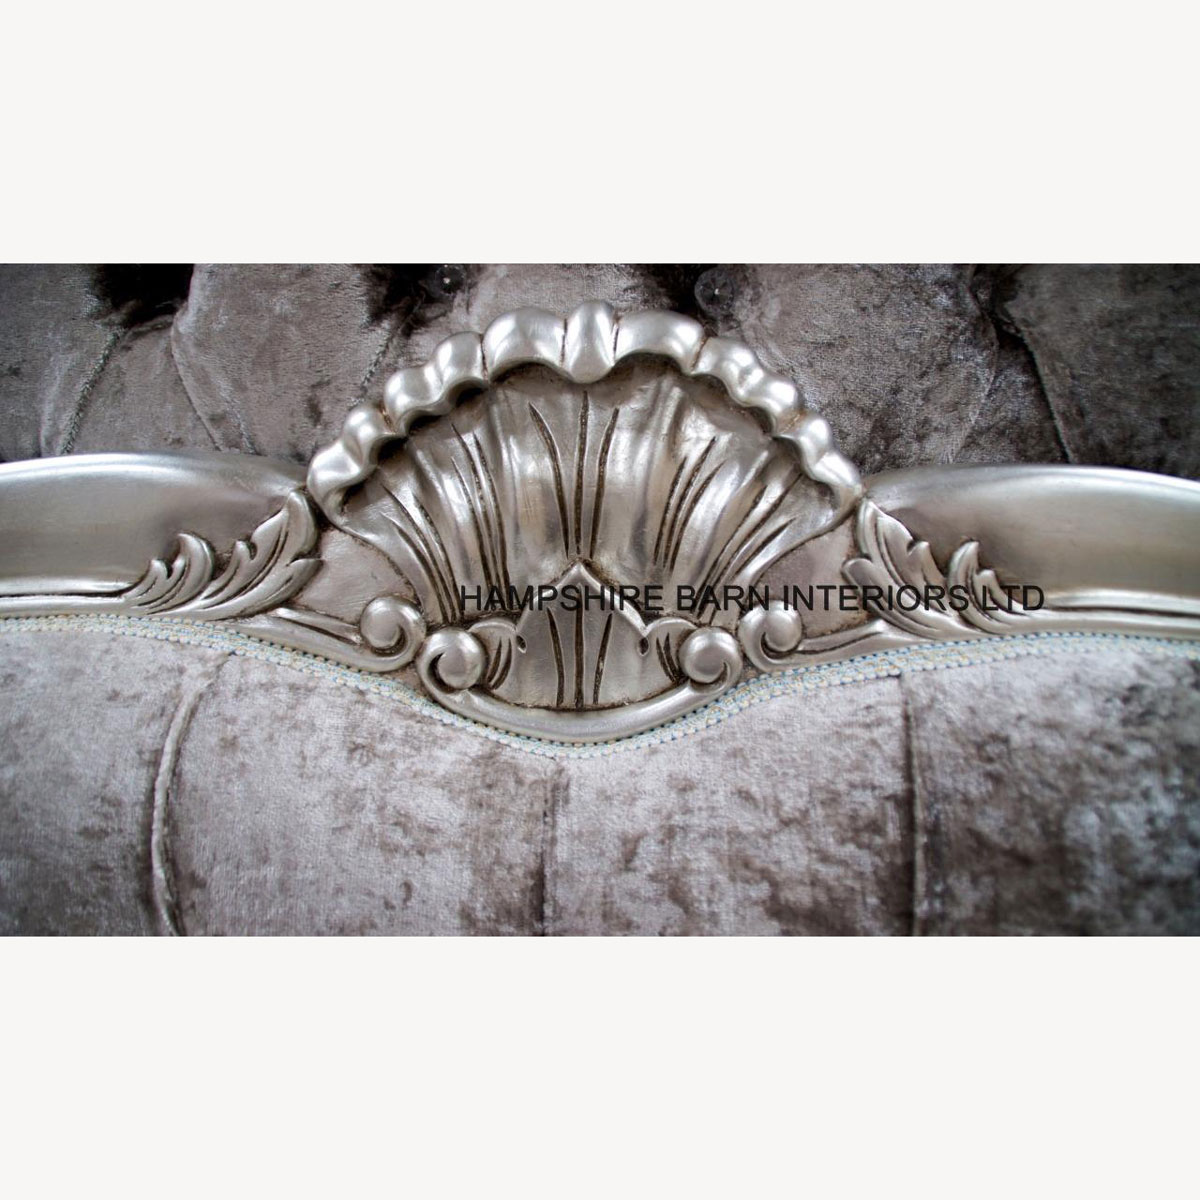 Cannes French Style Ornate Bed Frame In Silver Leaf With Silver Mercury Crushed Velvet And Crystal Buttons 3 - Hampshire Barn Interiors - Cannes French Style Ornate Bed Frame In Silver Leaf With Silver Mercury Crushed Velvet And Crystal Buttons -